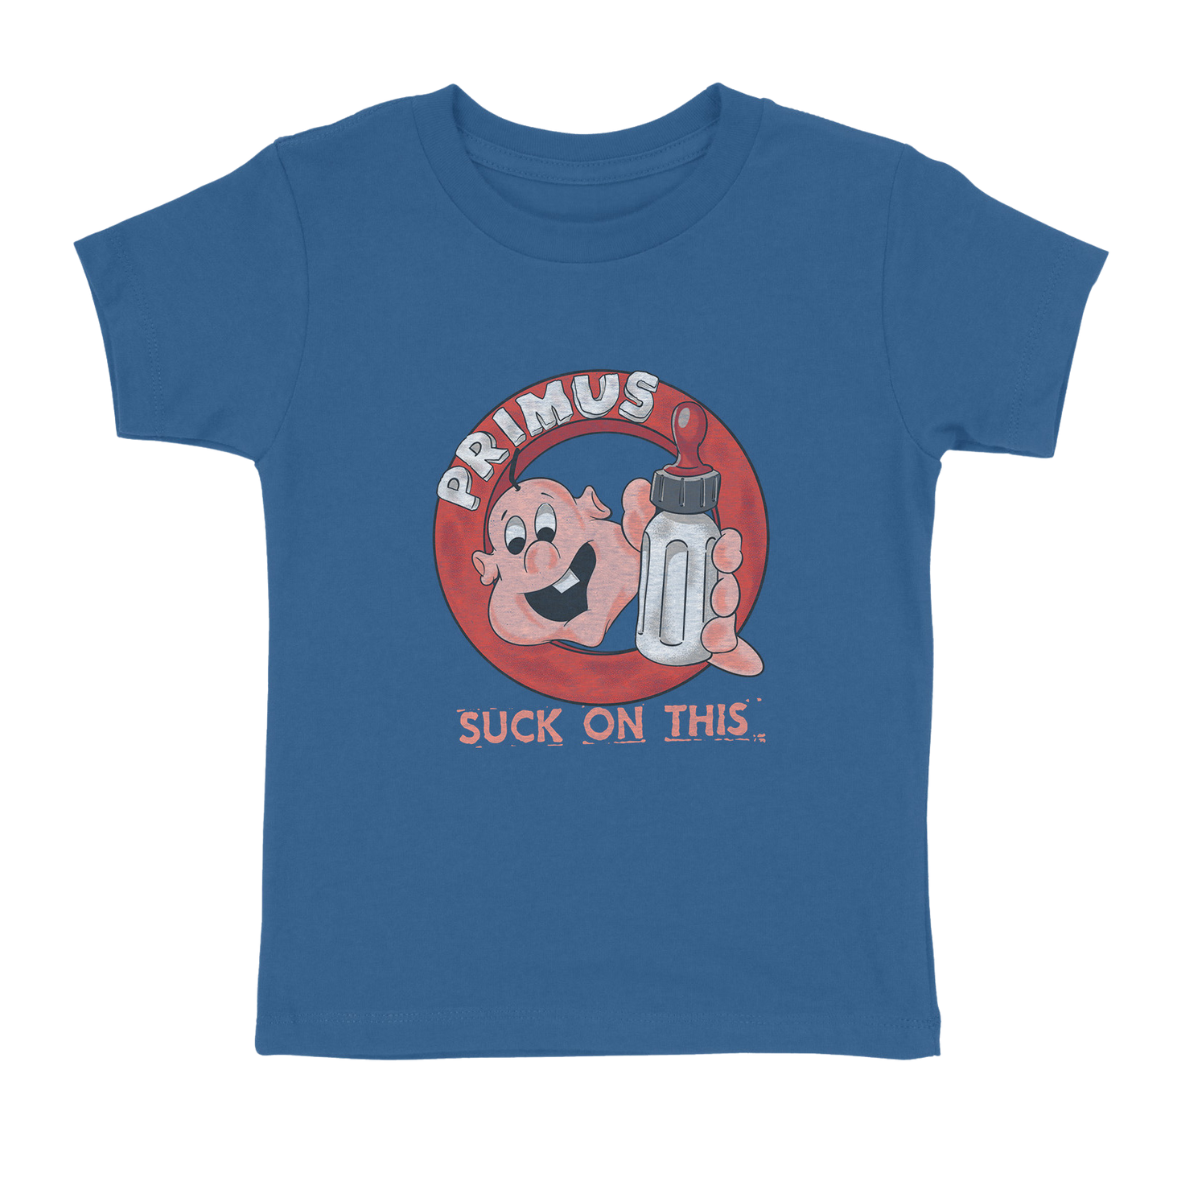 Primus - Suck On This Youth T-Shirt